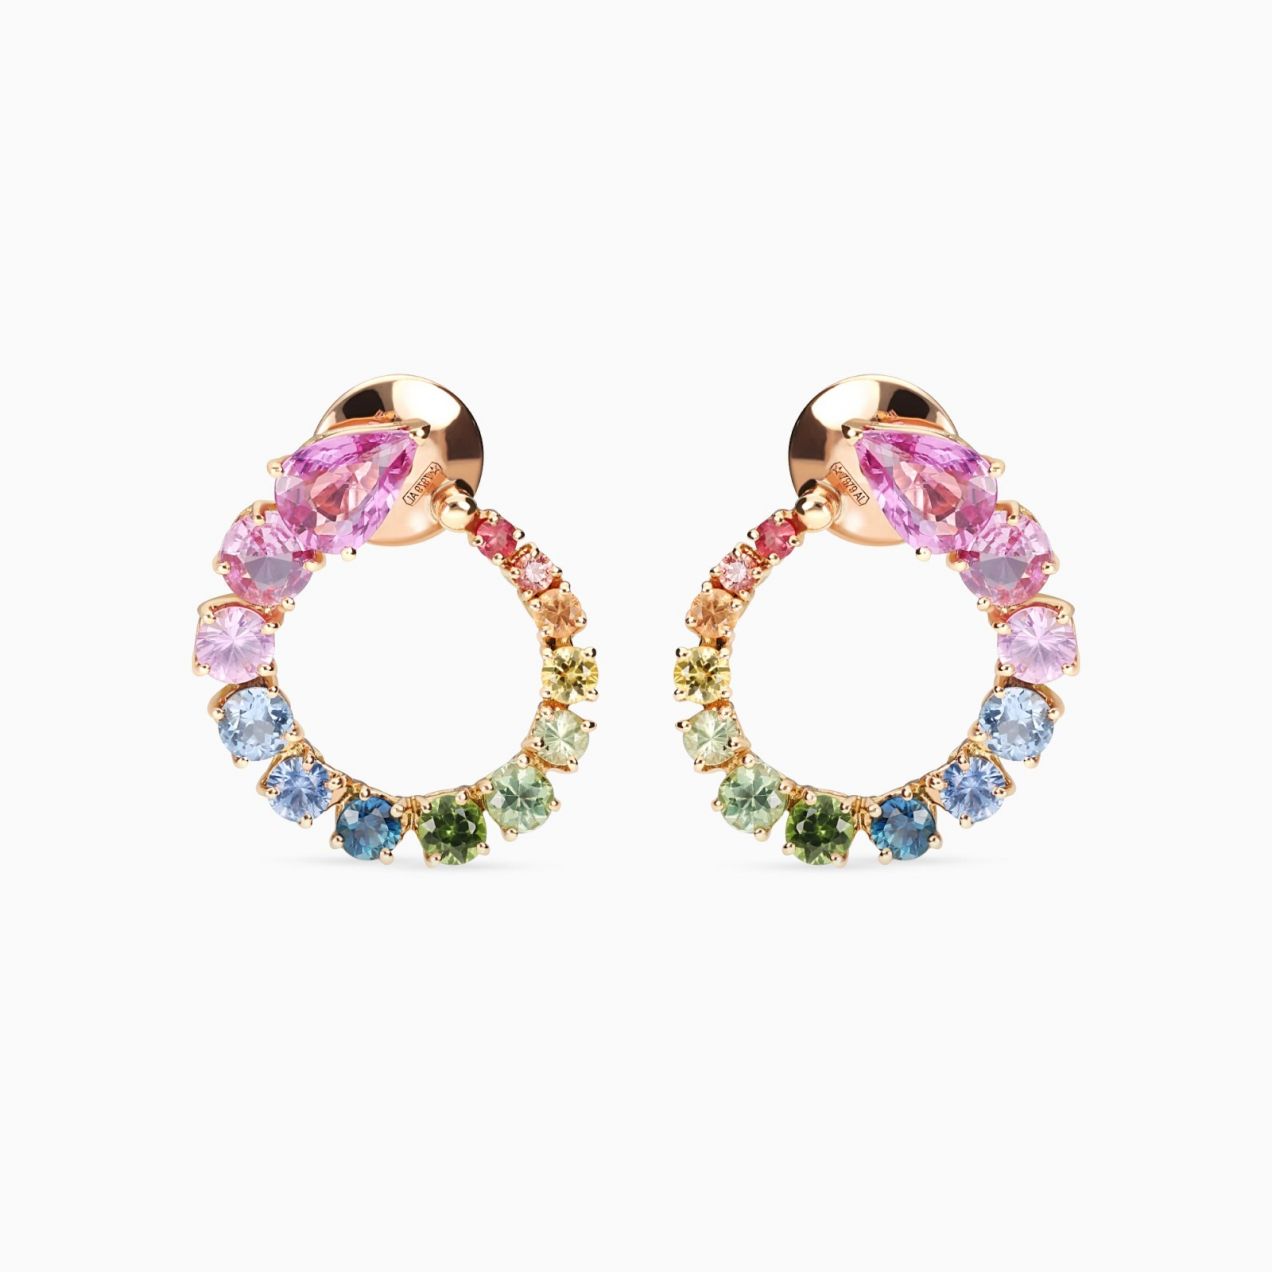 Rose gold hoop earrings with multicoloured sapphires and pear-cut pink sapphires